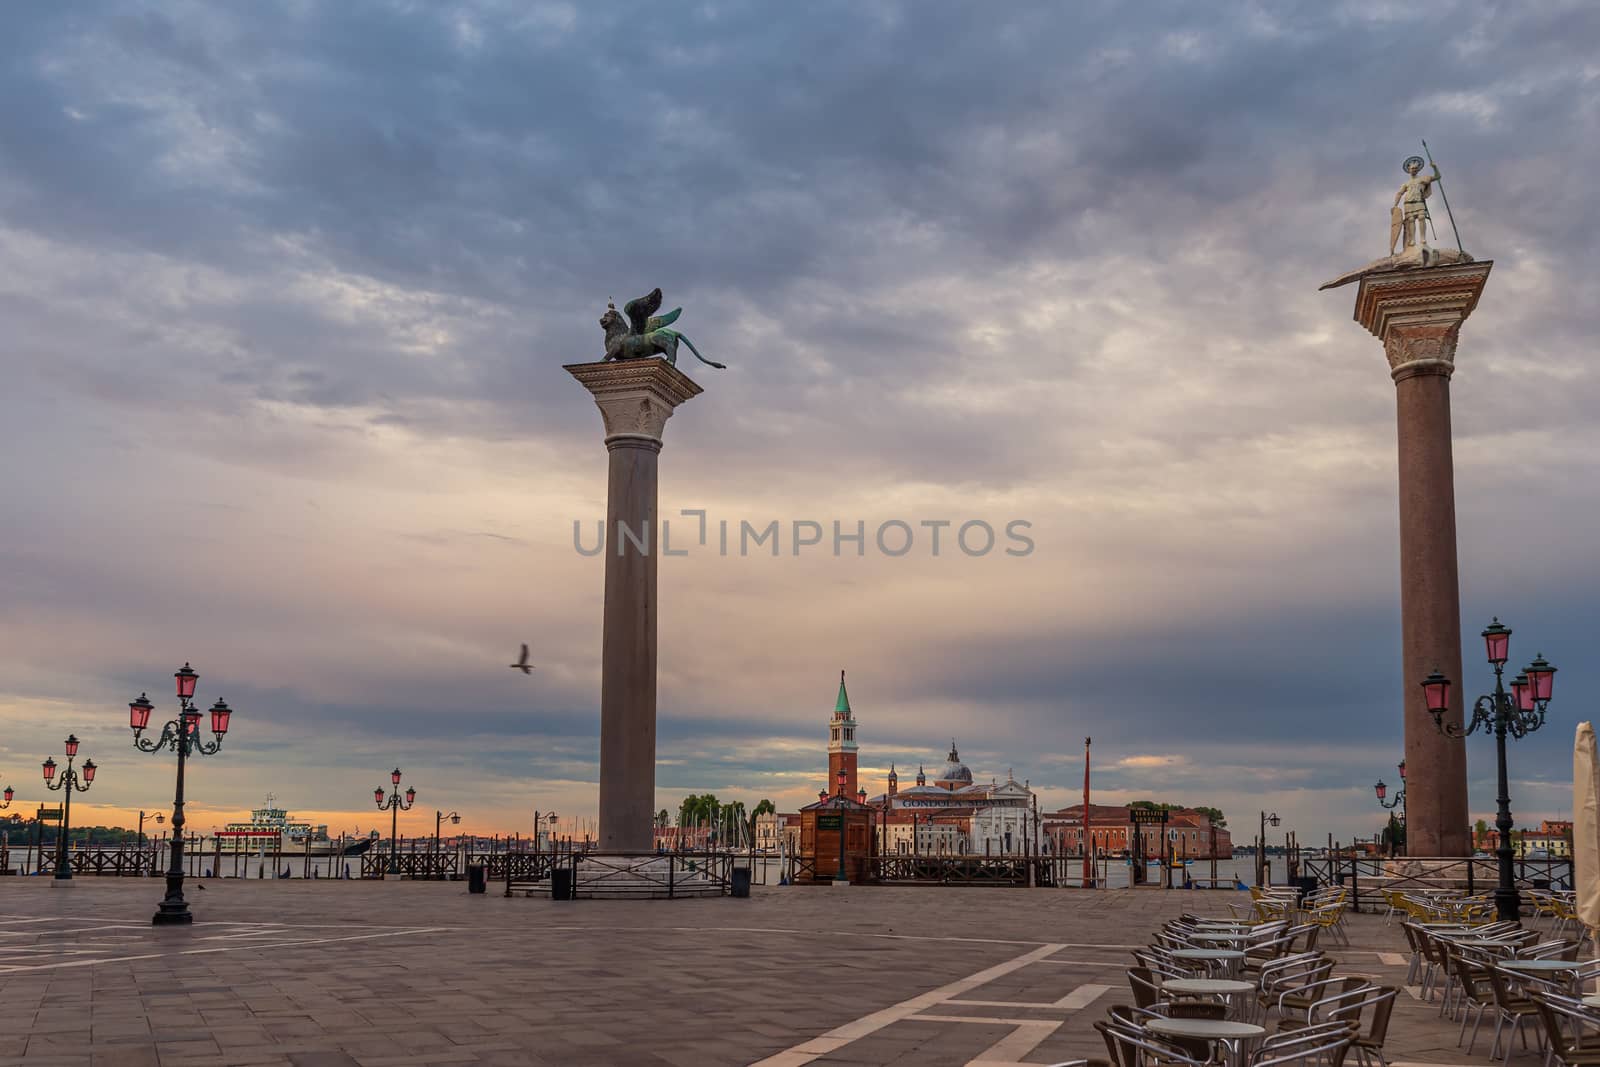 Venice in the early morning just after sunrise with mystic clouds